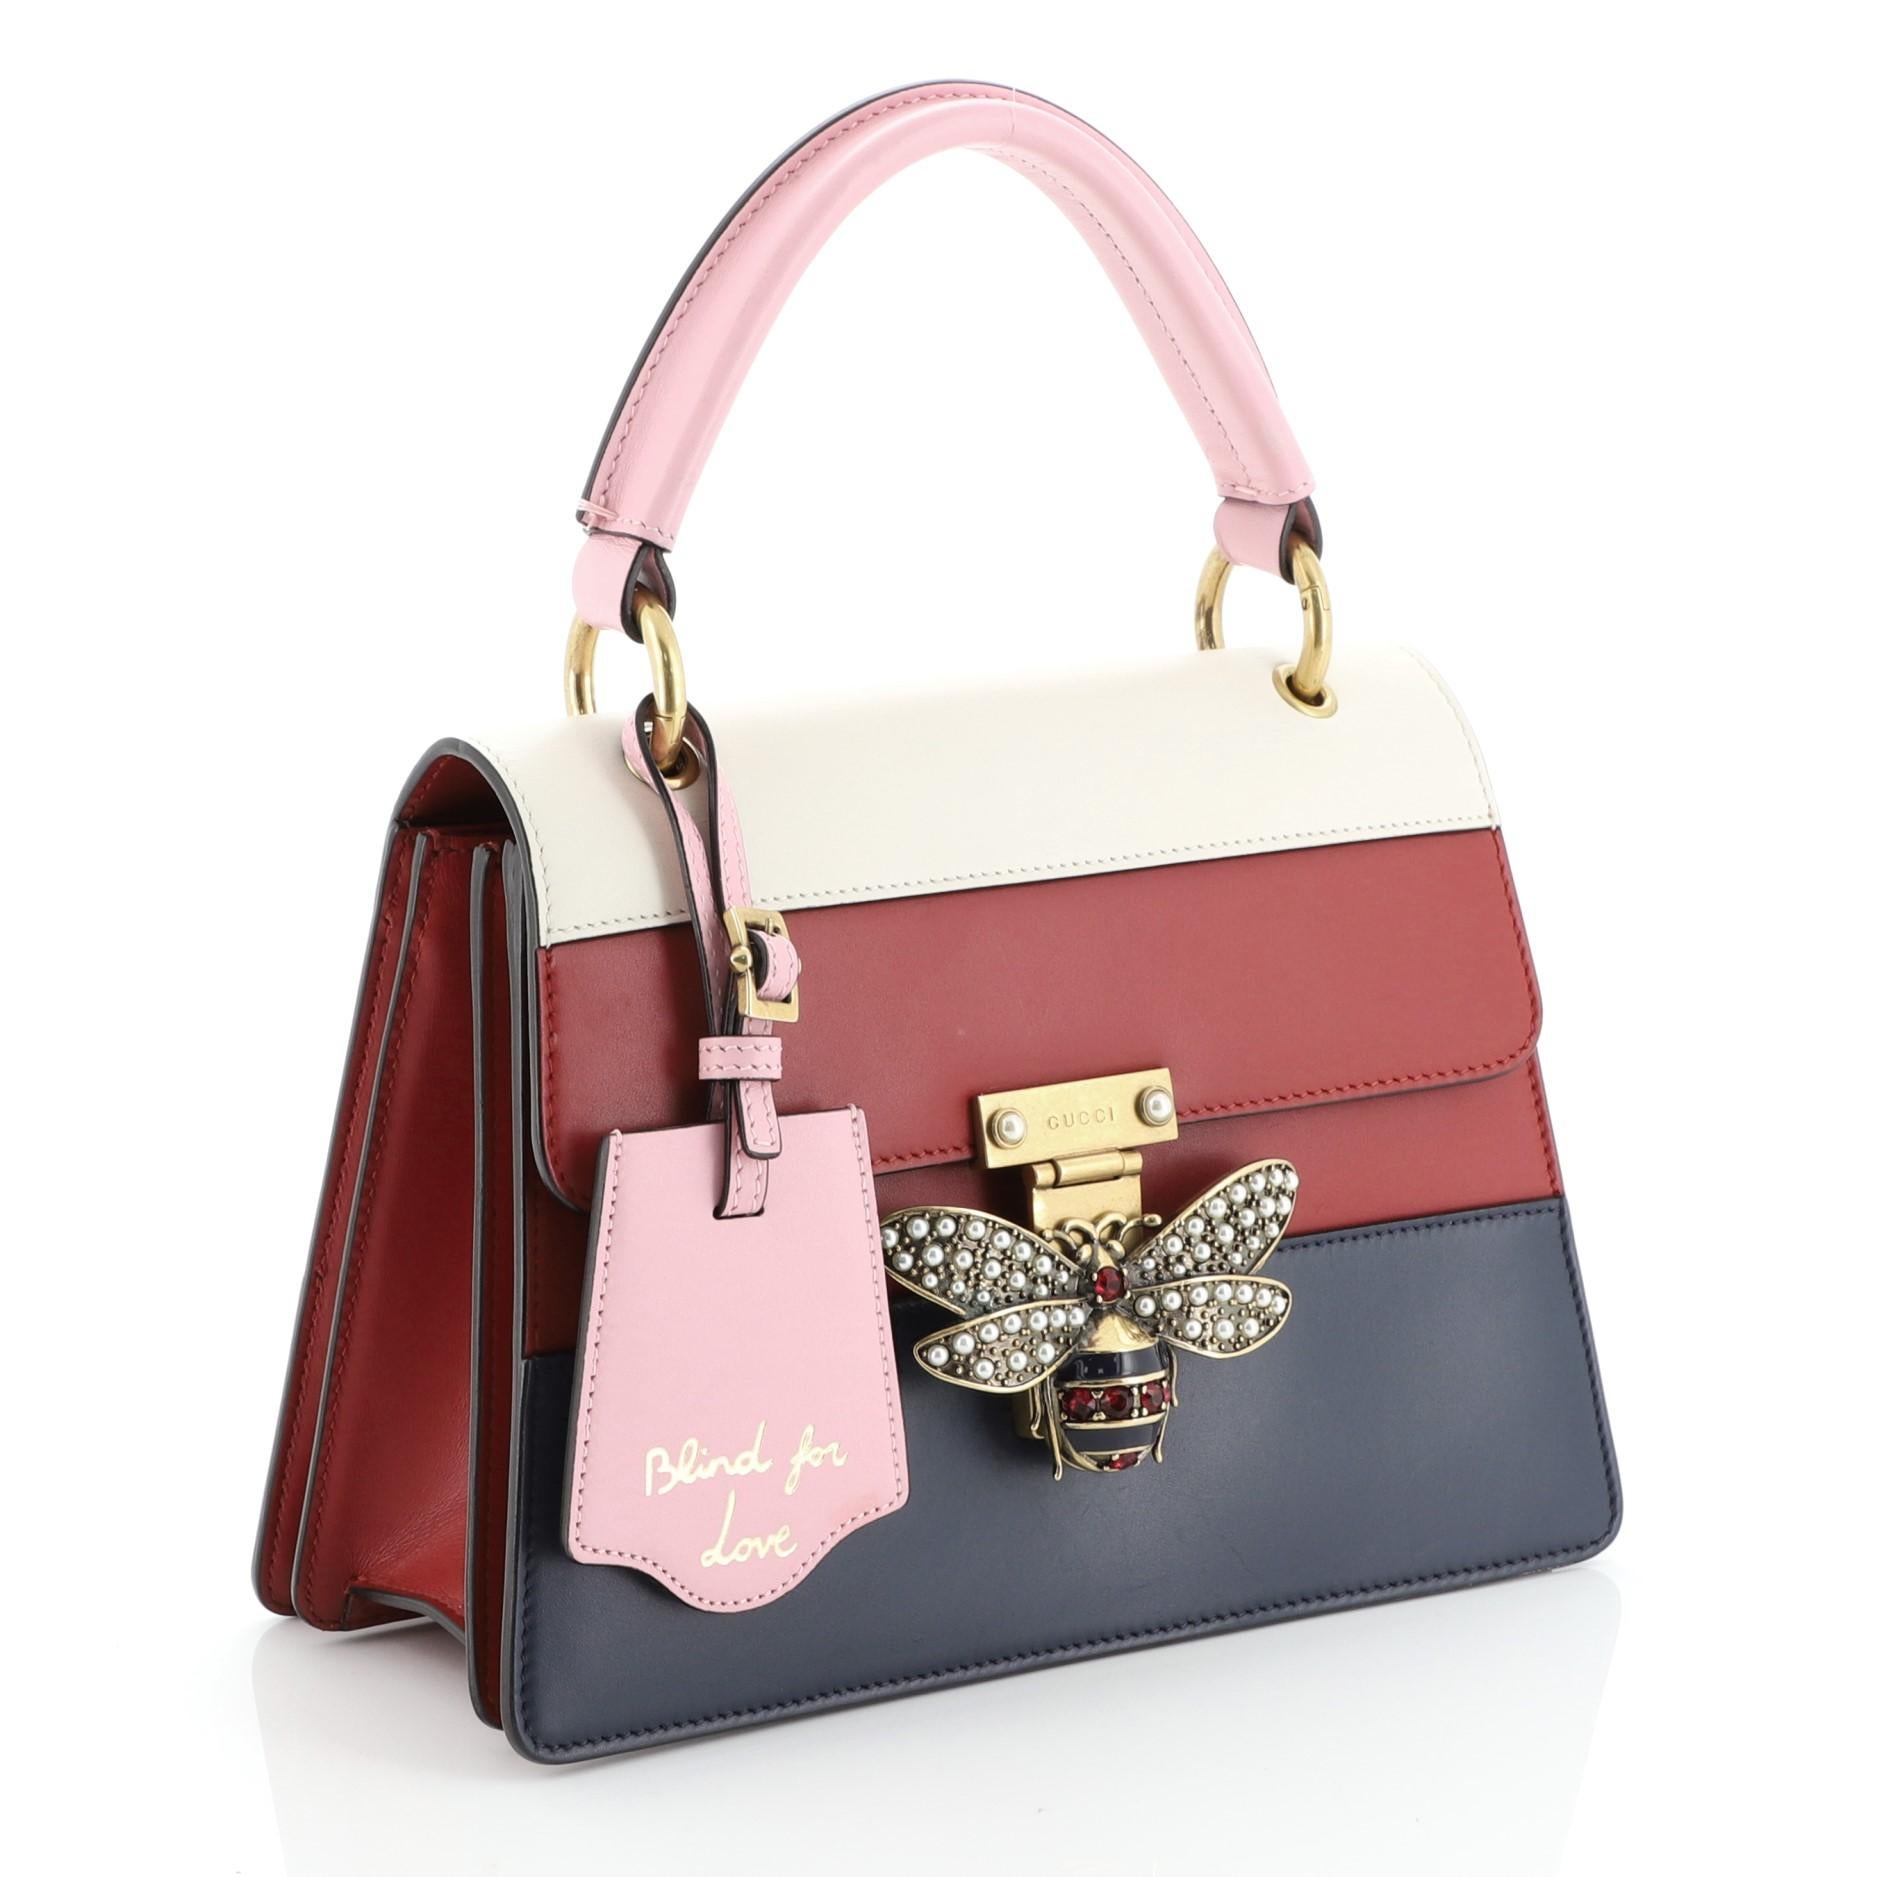 This Gucci Queen Margaret Top Handle Bag Colorblock Leather Small, crafted from blue, pink, red and white leather, features a leather top handle, bejeweled bee on its flap, and aged gold-tone hardware. It opens to a neutral microfiber interior